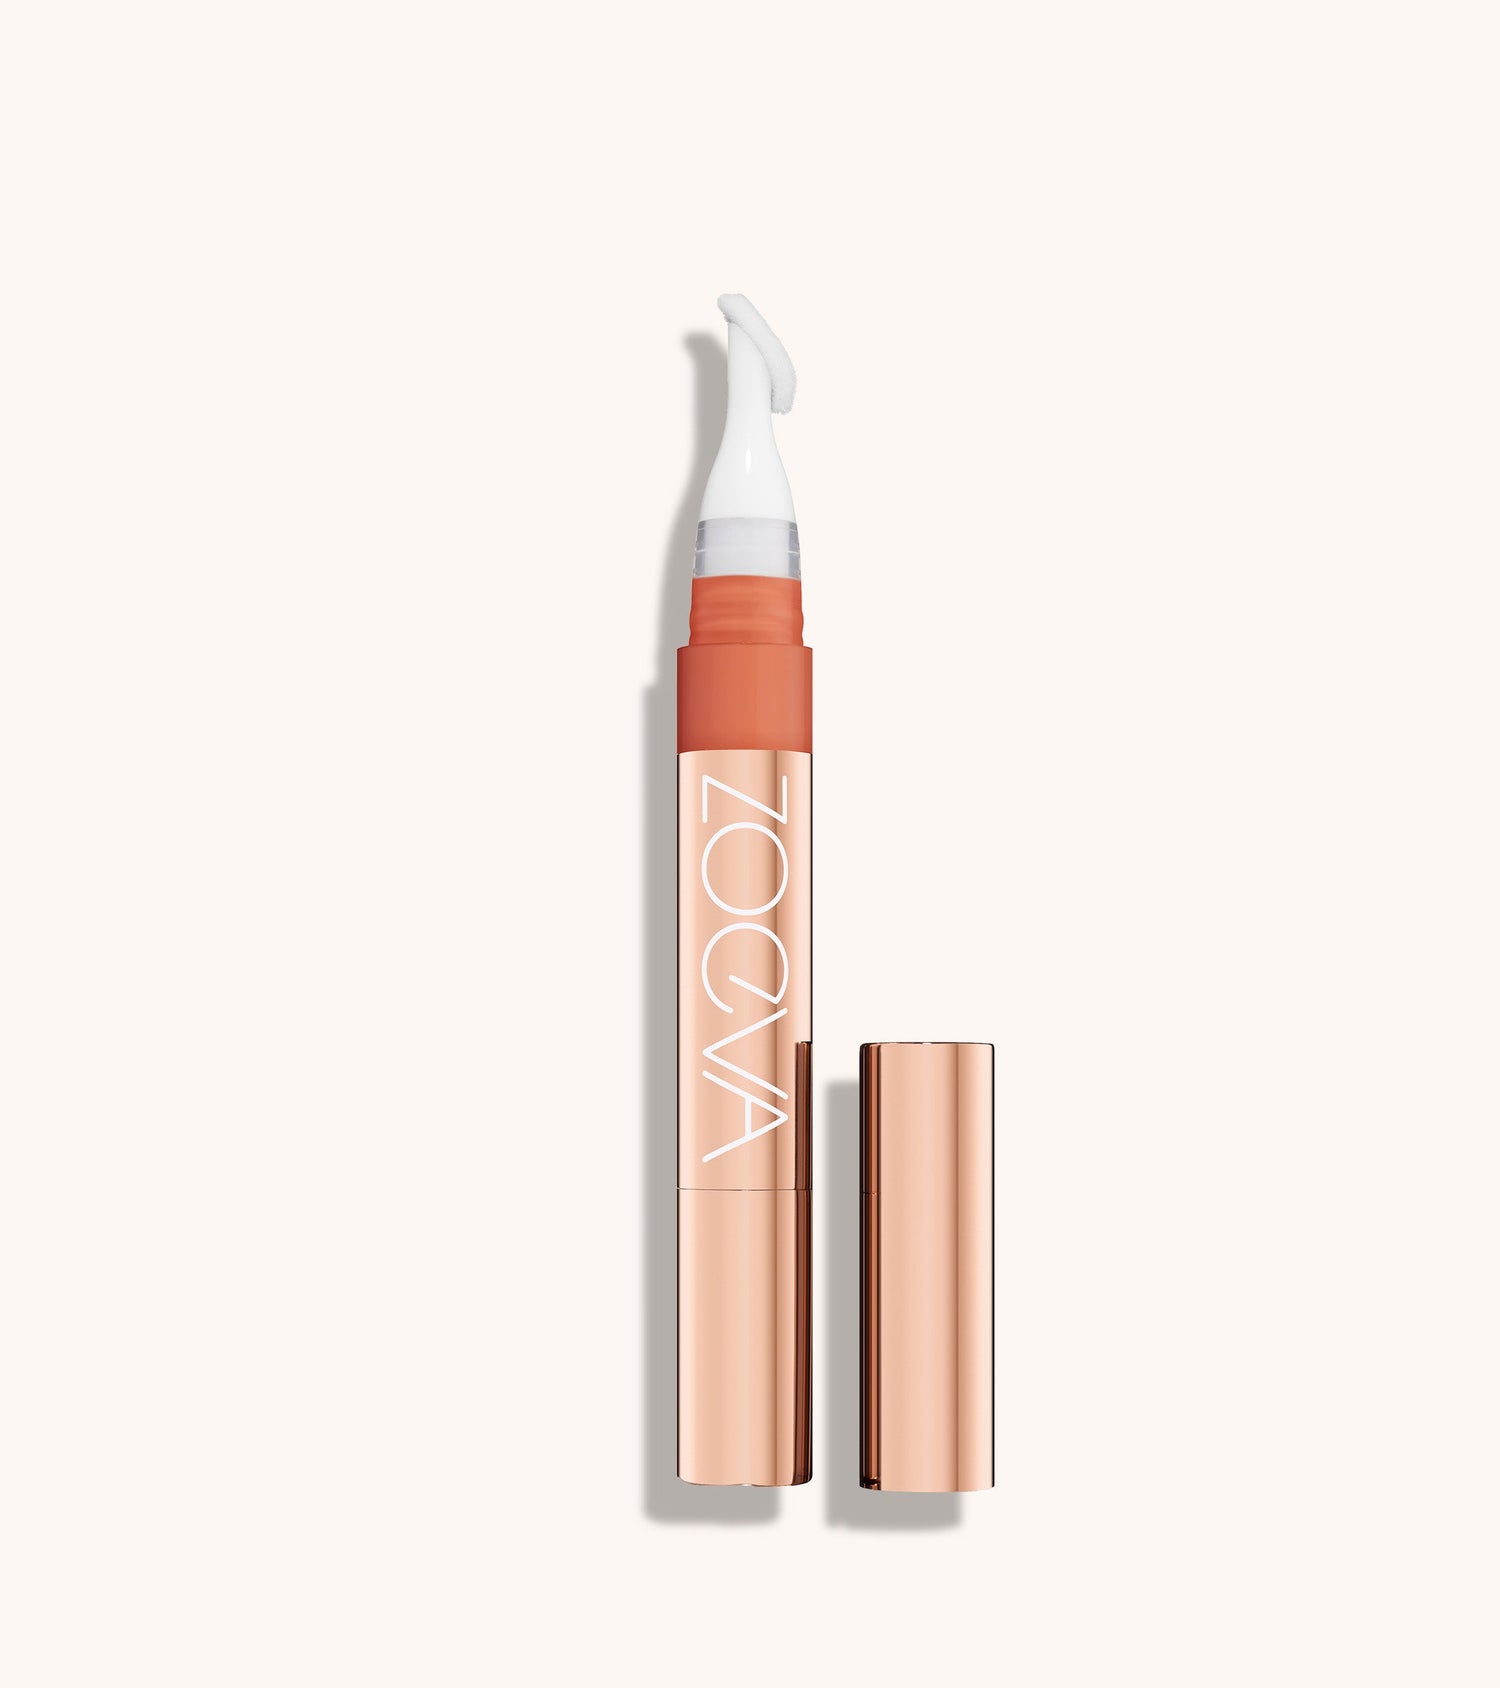 Retouch Elixir Concealer (Cheer Up) Main Image featured